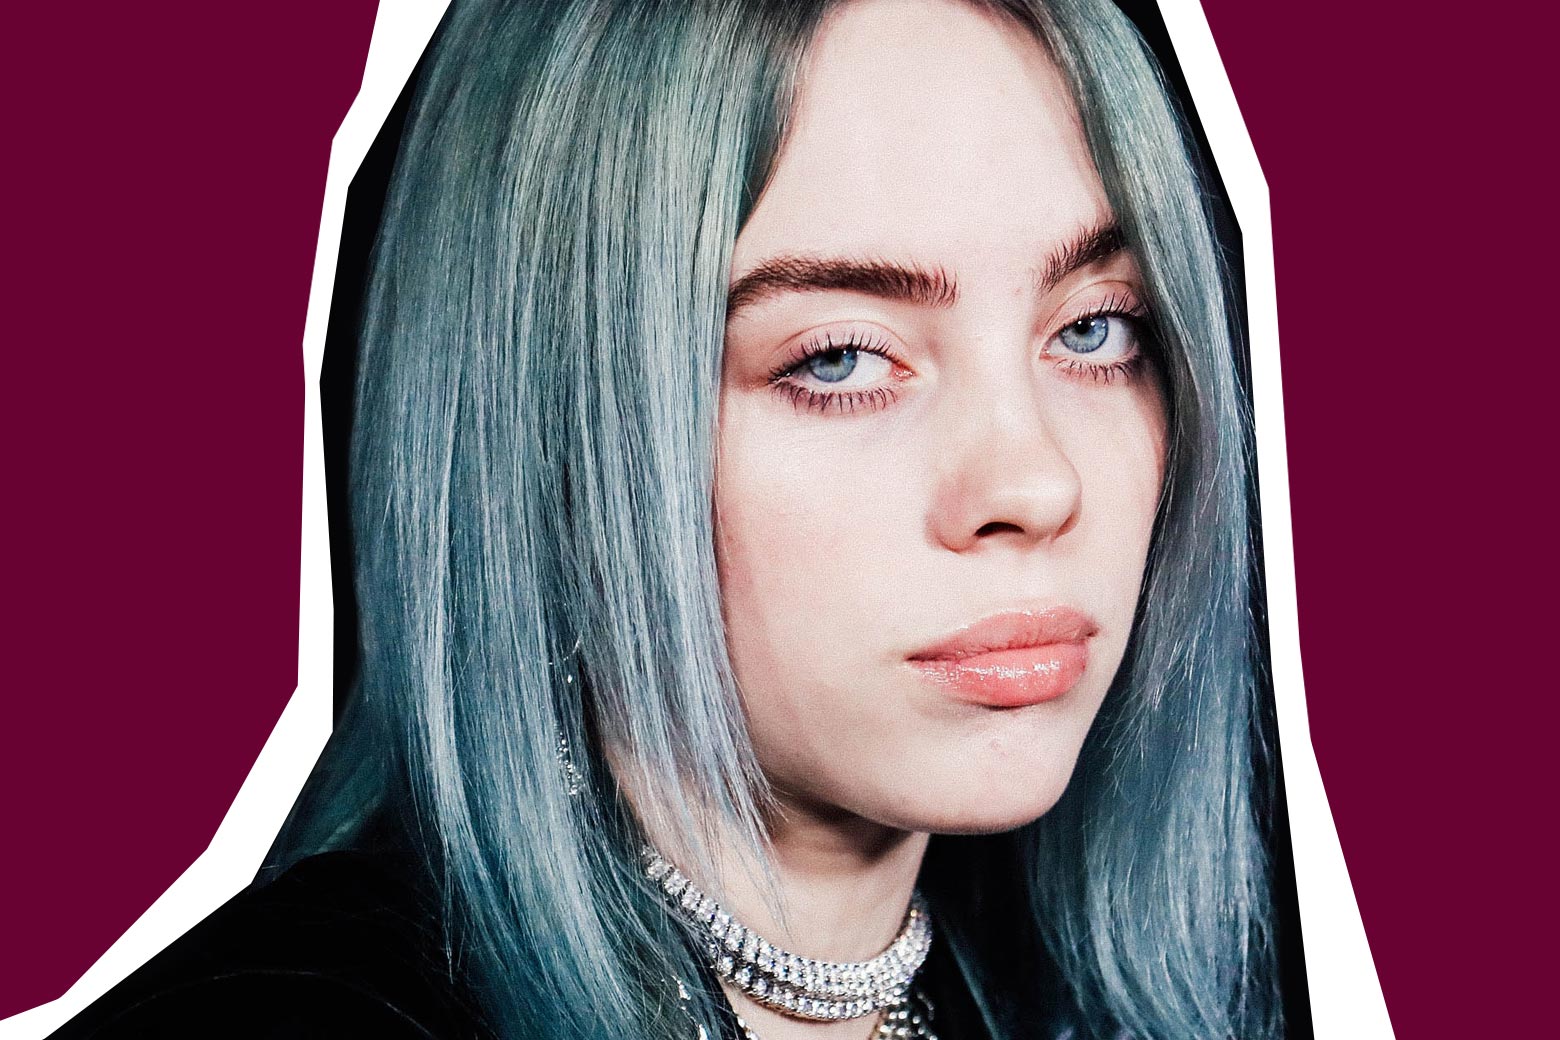 6. Billie Eilish's blue hair and white and green outfit from her "My Future" music video - wide 1